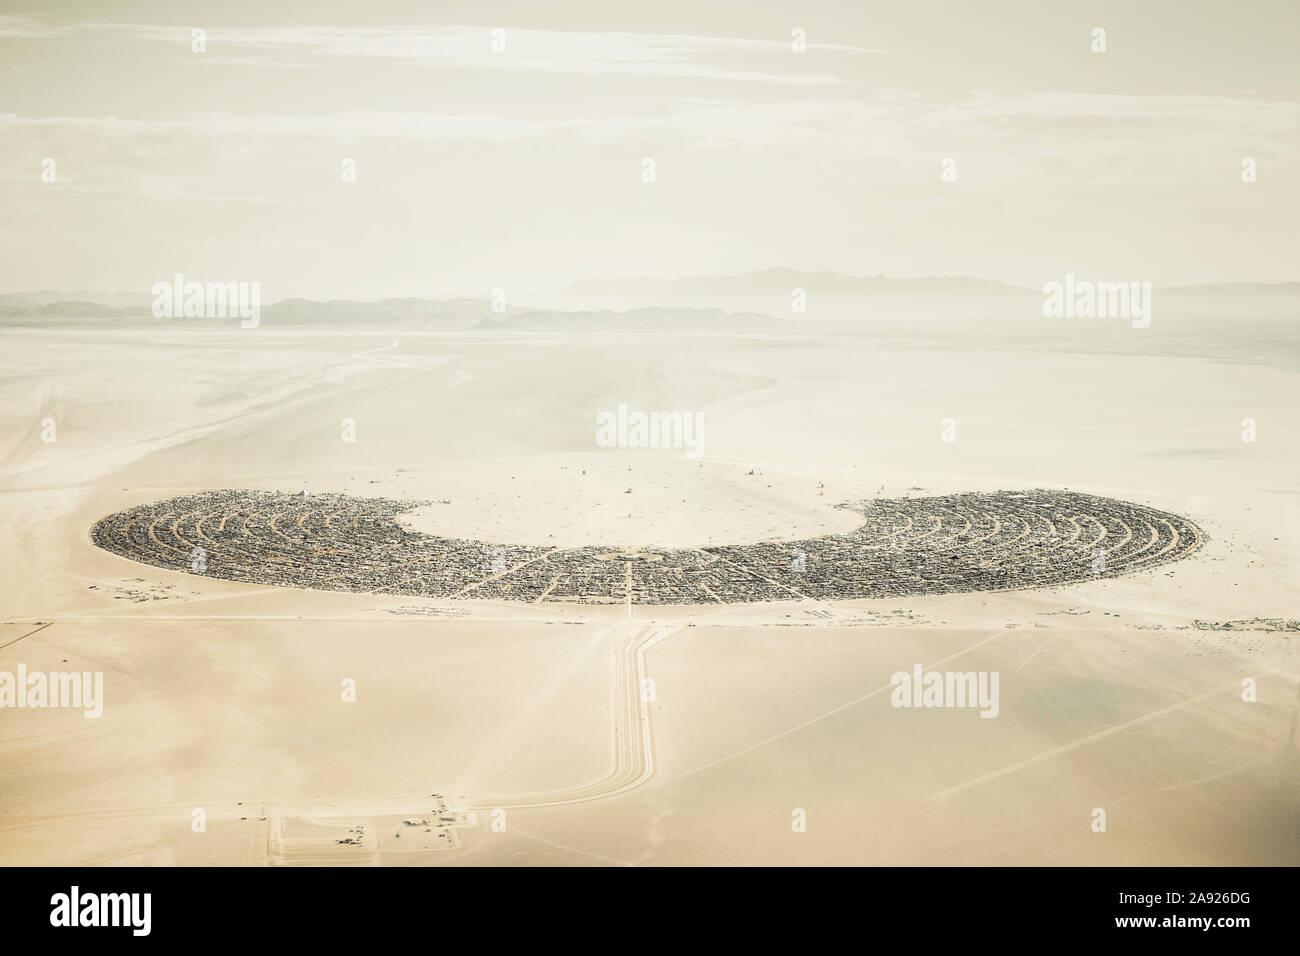 An aerial view of Burning Man 2019 photographed from 3,000 feet in the air. Stock Photo